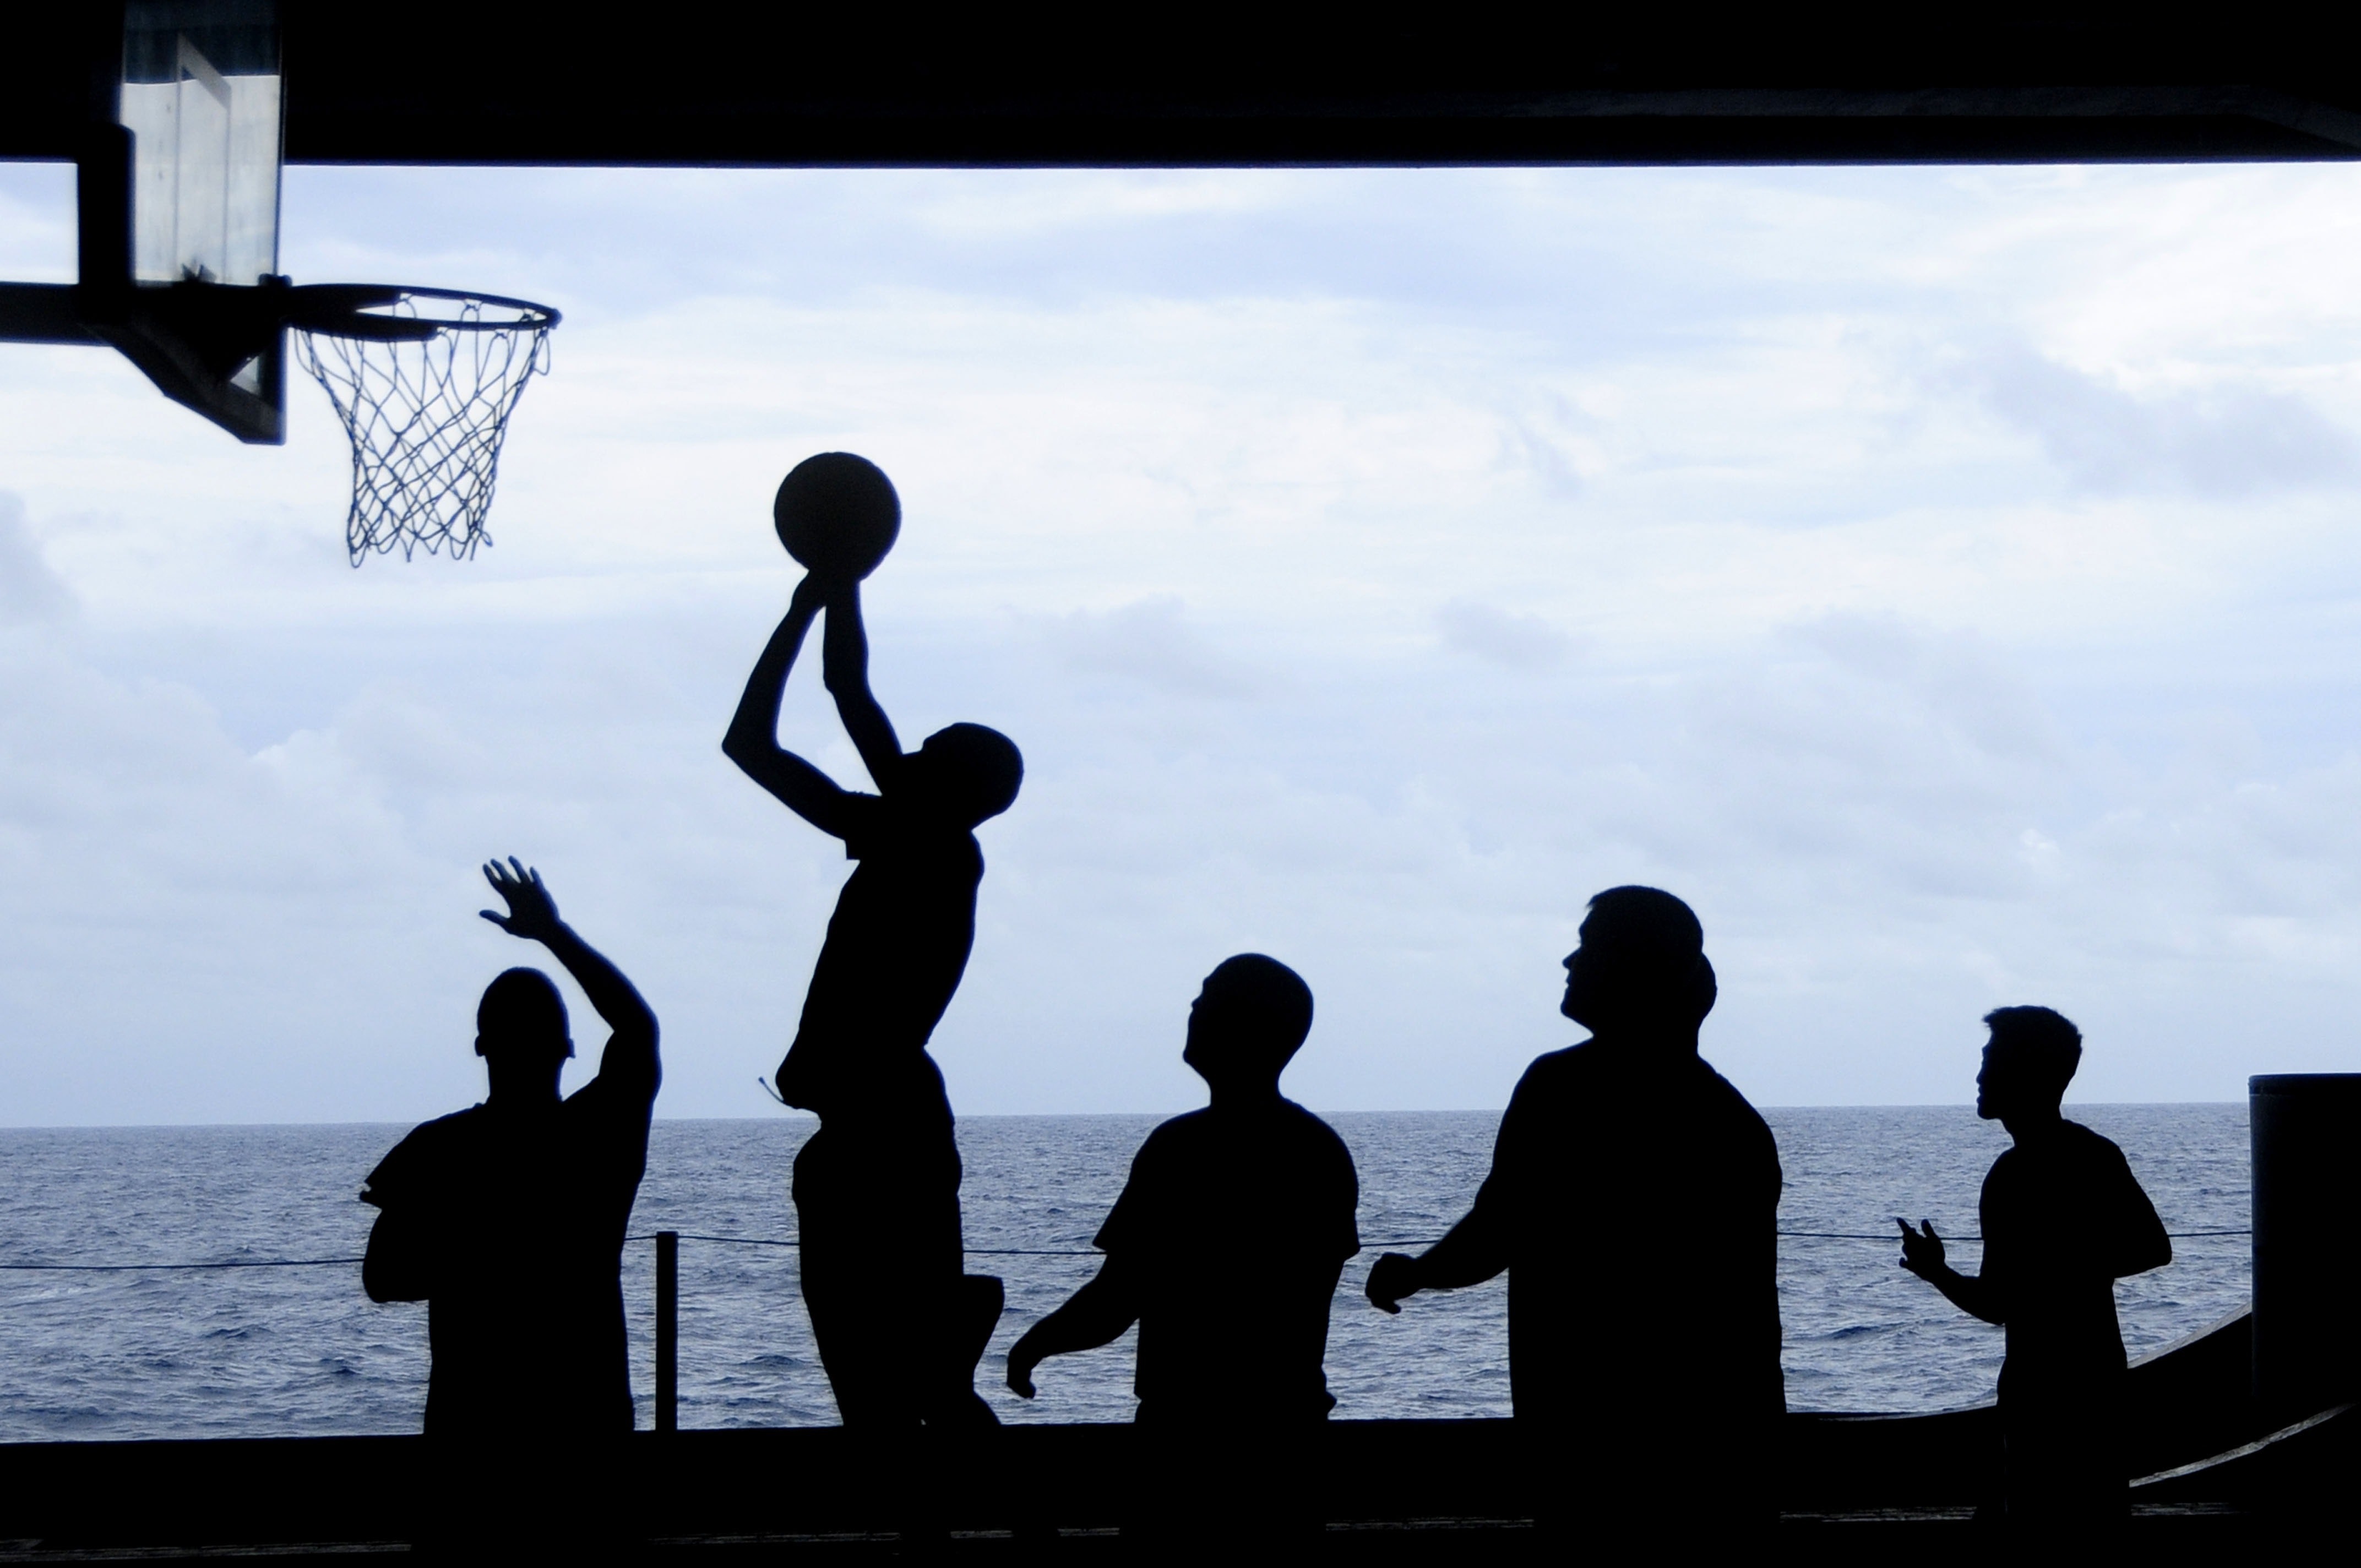 Silhouette of Men Playing Basketball, Basketball, Game, Ocean, Players, HQ Photo